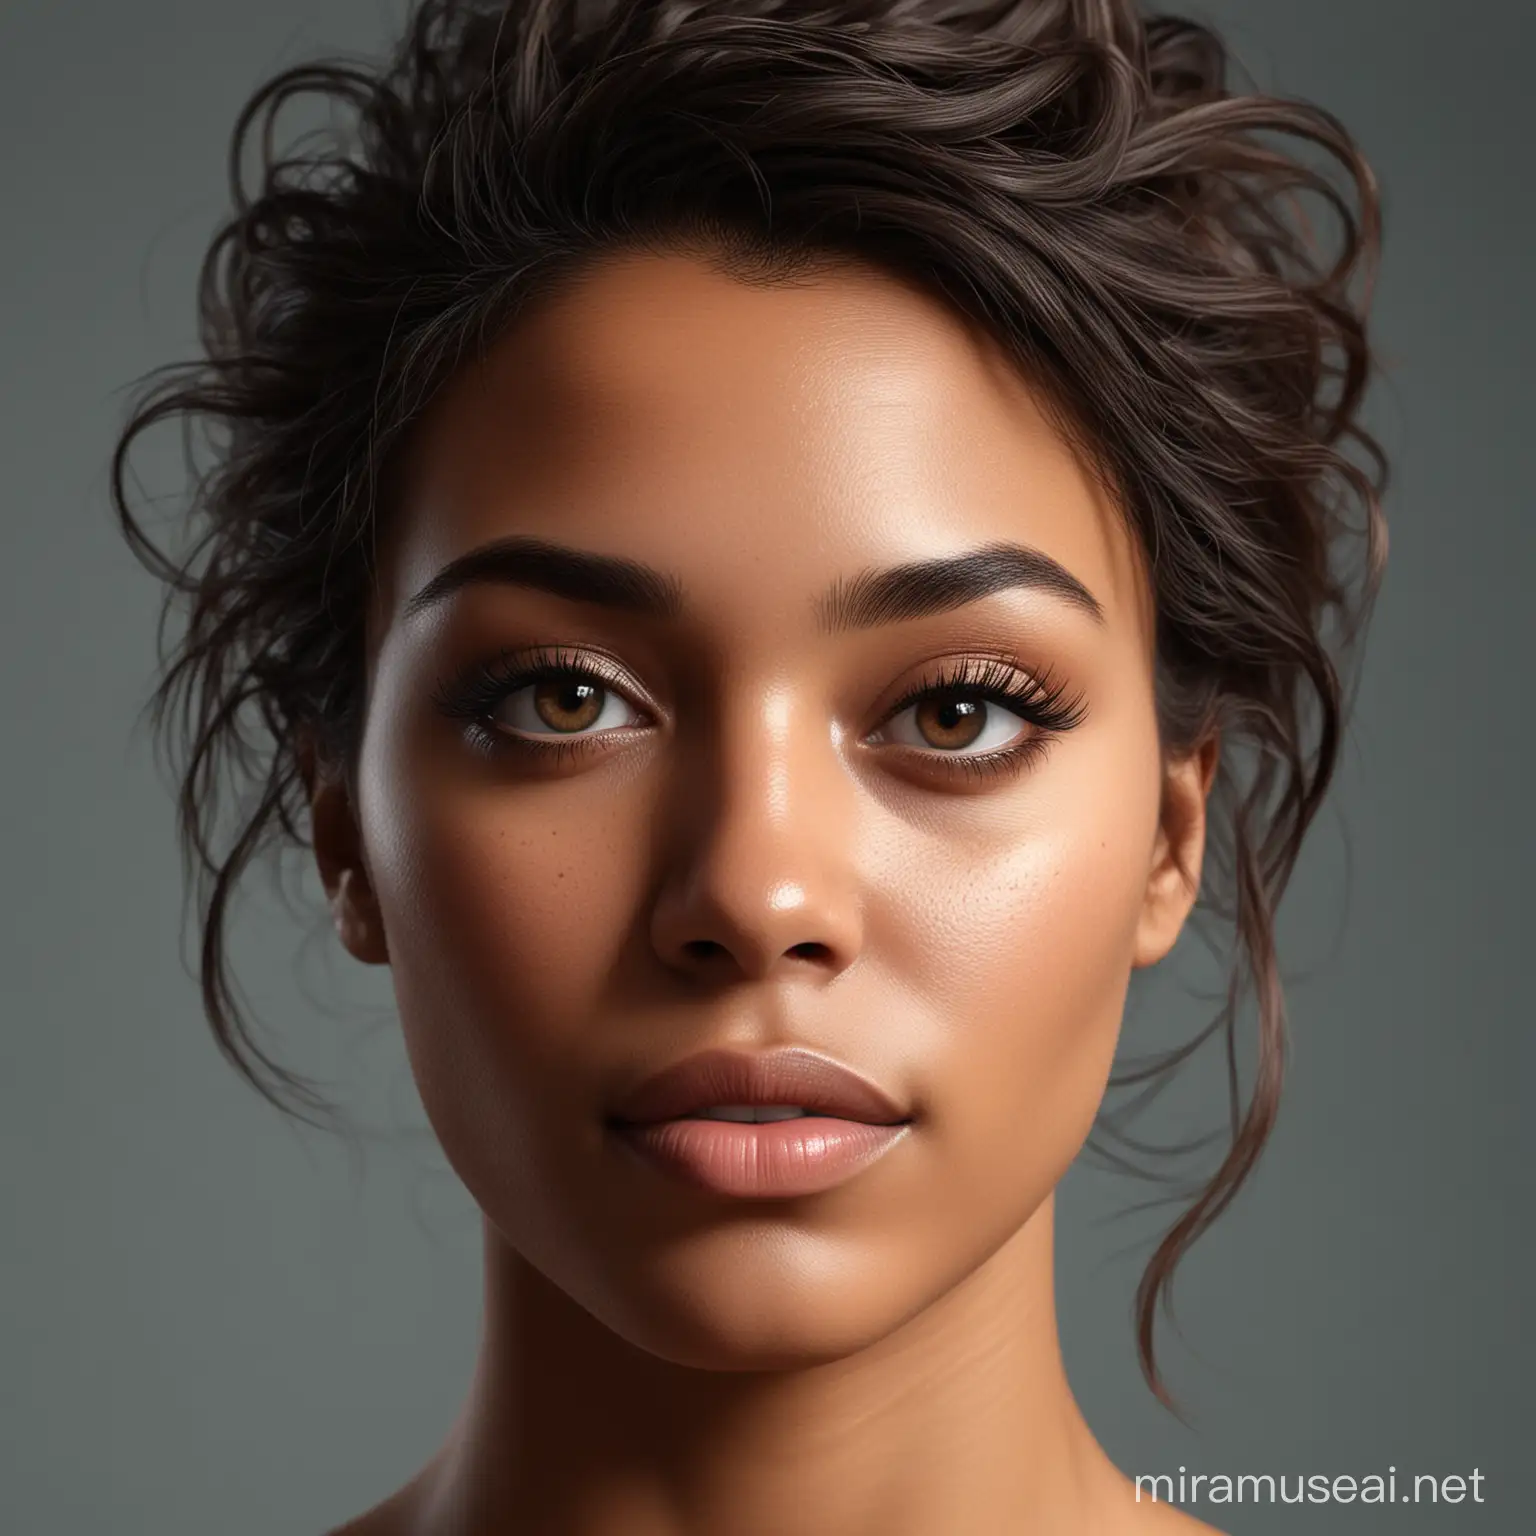 Realistic Portrait of a Black Woman with Flowy Hair in a Natural Pose